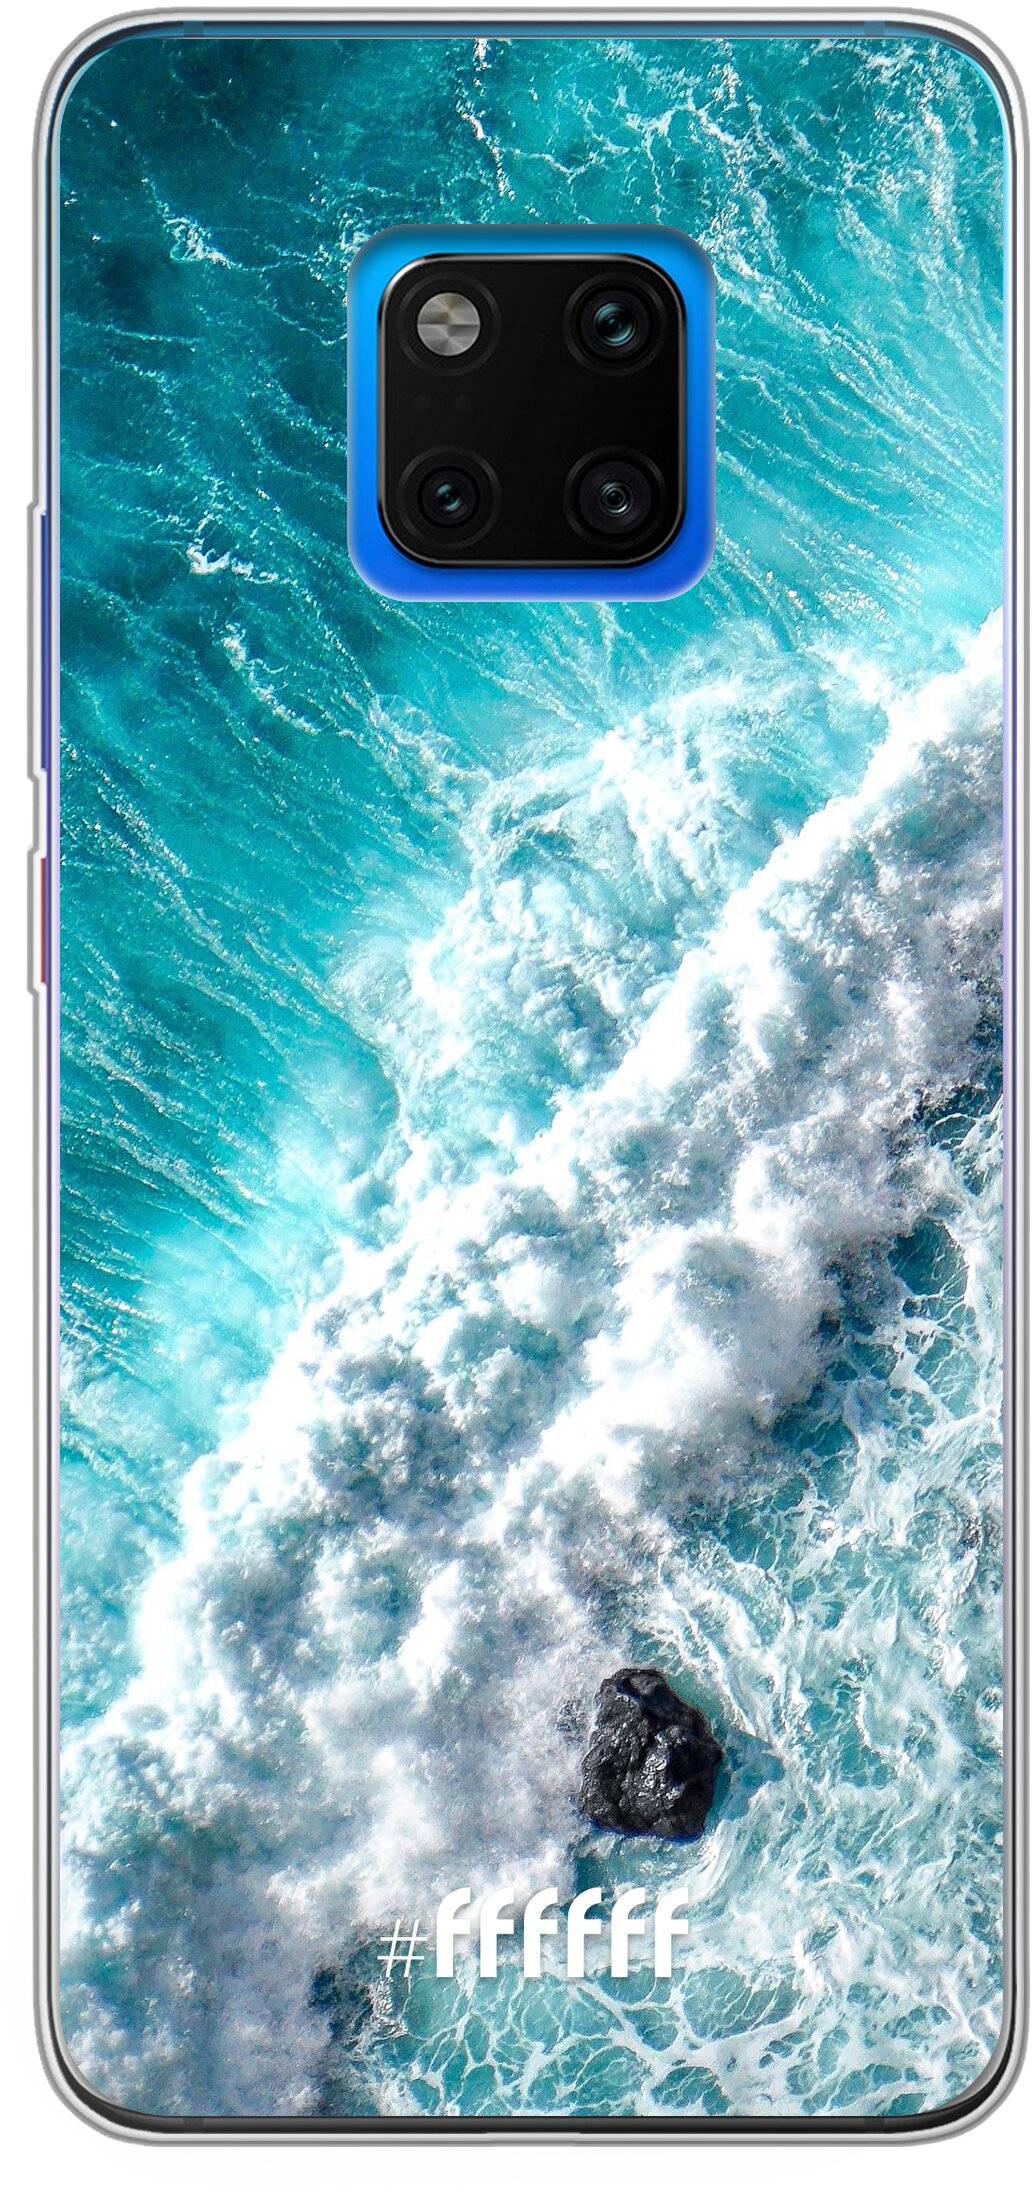 Perfect to Surf Mate 20 Pro